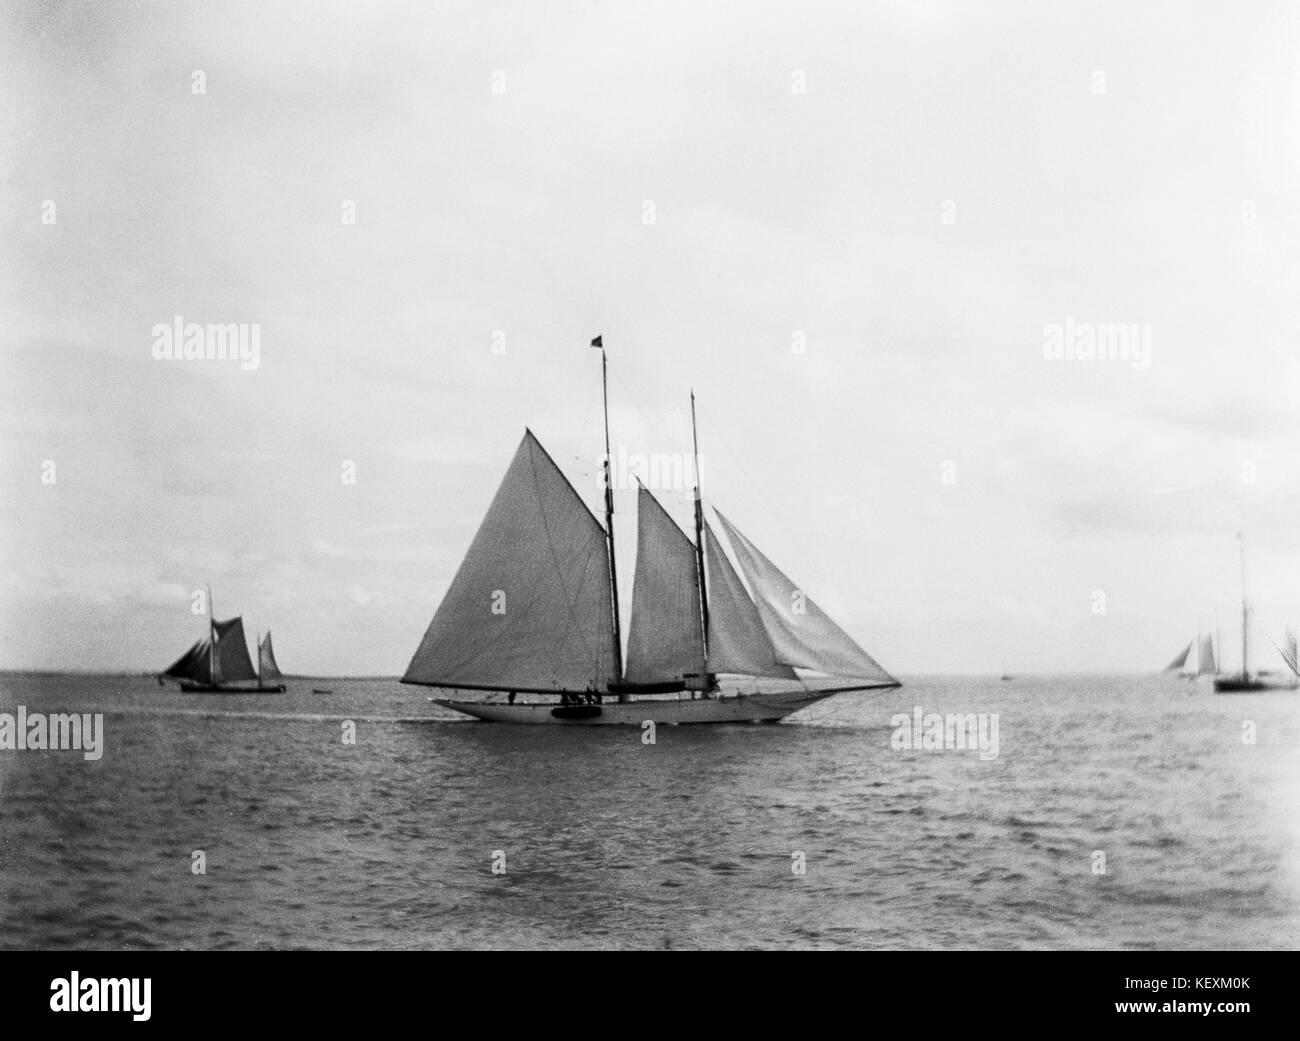 AJAXNETPHOTO. 1900S(APPROX). SOLENT, ENGLAND. - SCHOONER YACHT UNDER WAY IN THE SOLENT. PHOTOGRAPHER:UNKNOWN © DIGITAL IMAGE COPYRIGHT AJAX VINTAGE PICTURE LIBRARY SOURCE: AJAX VINTAGE PICTURE LIBRARY COLLECTION REF:AVL YAB 1900 5 Stock Photo